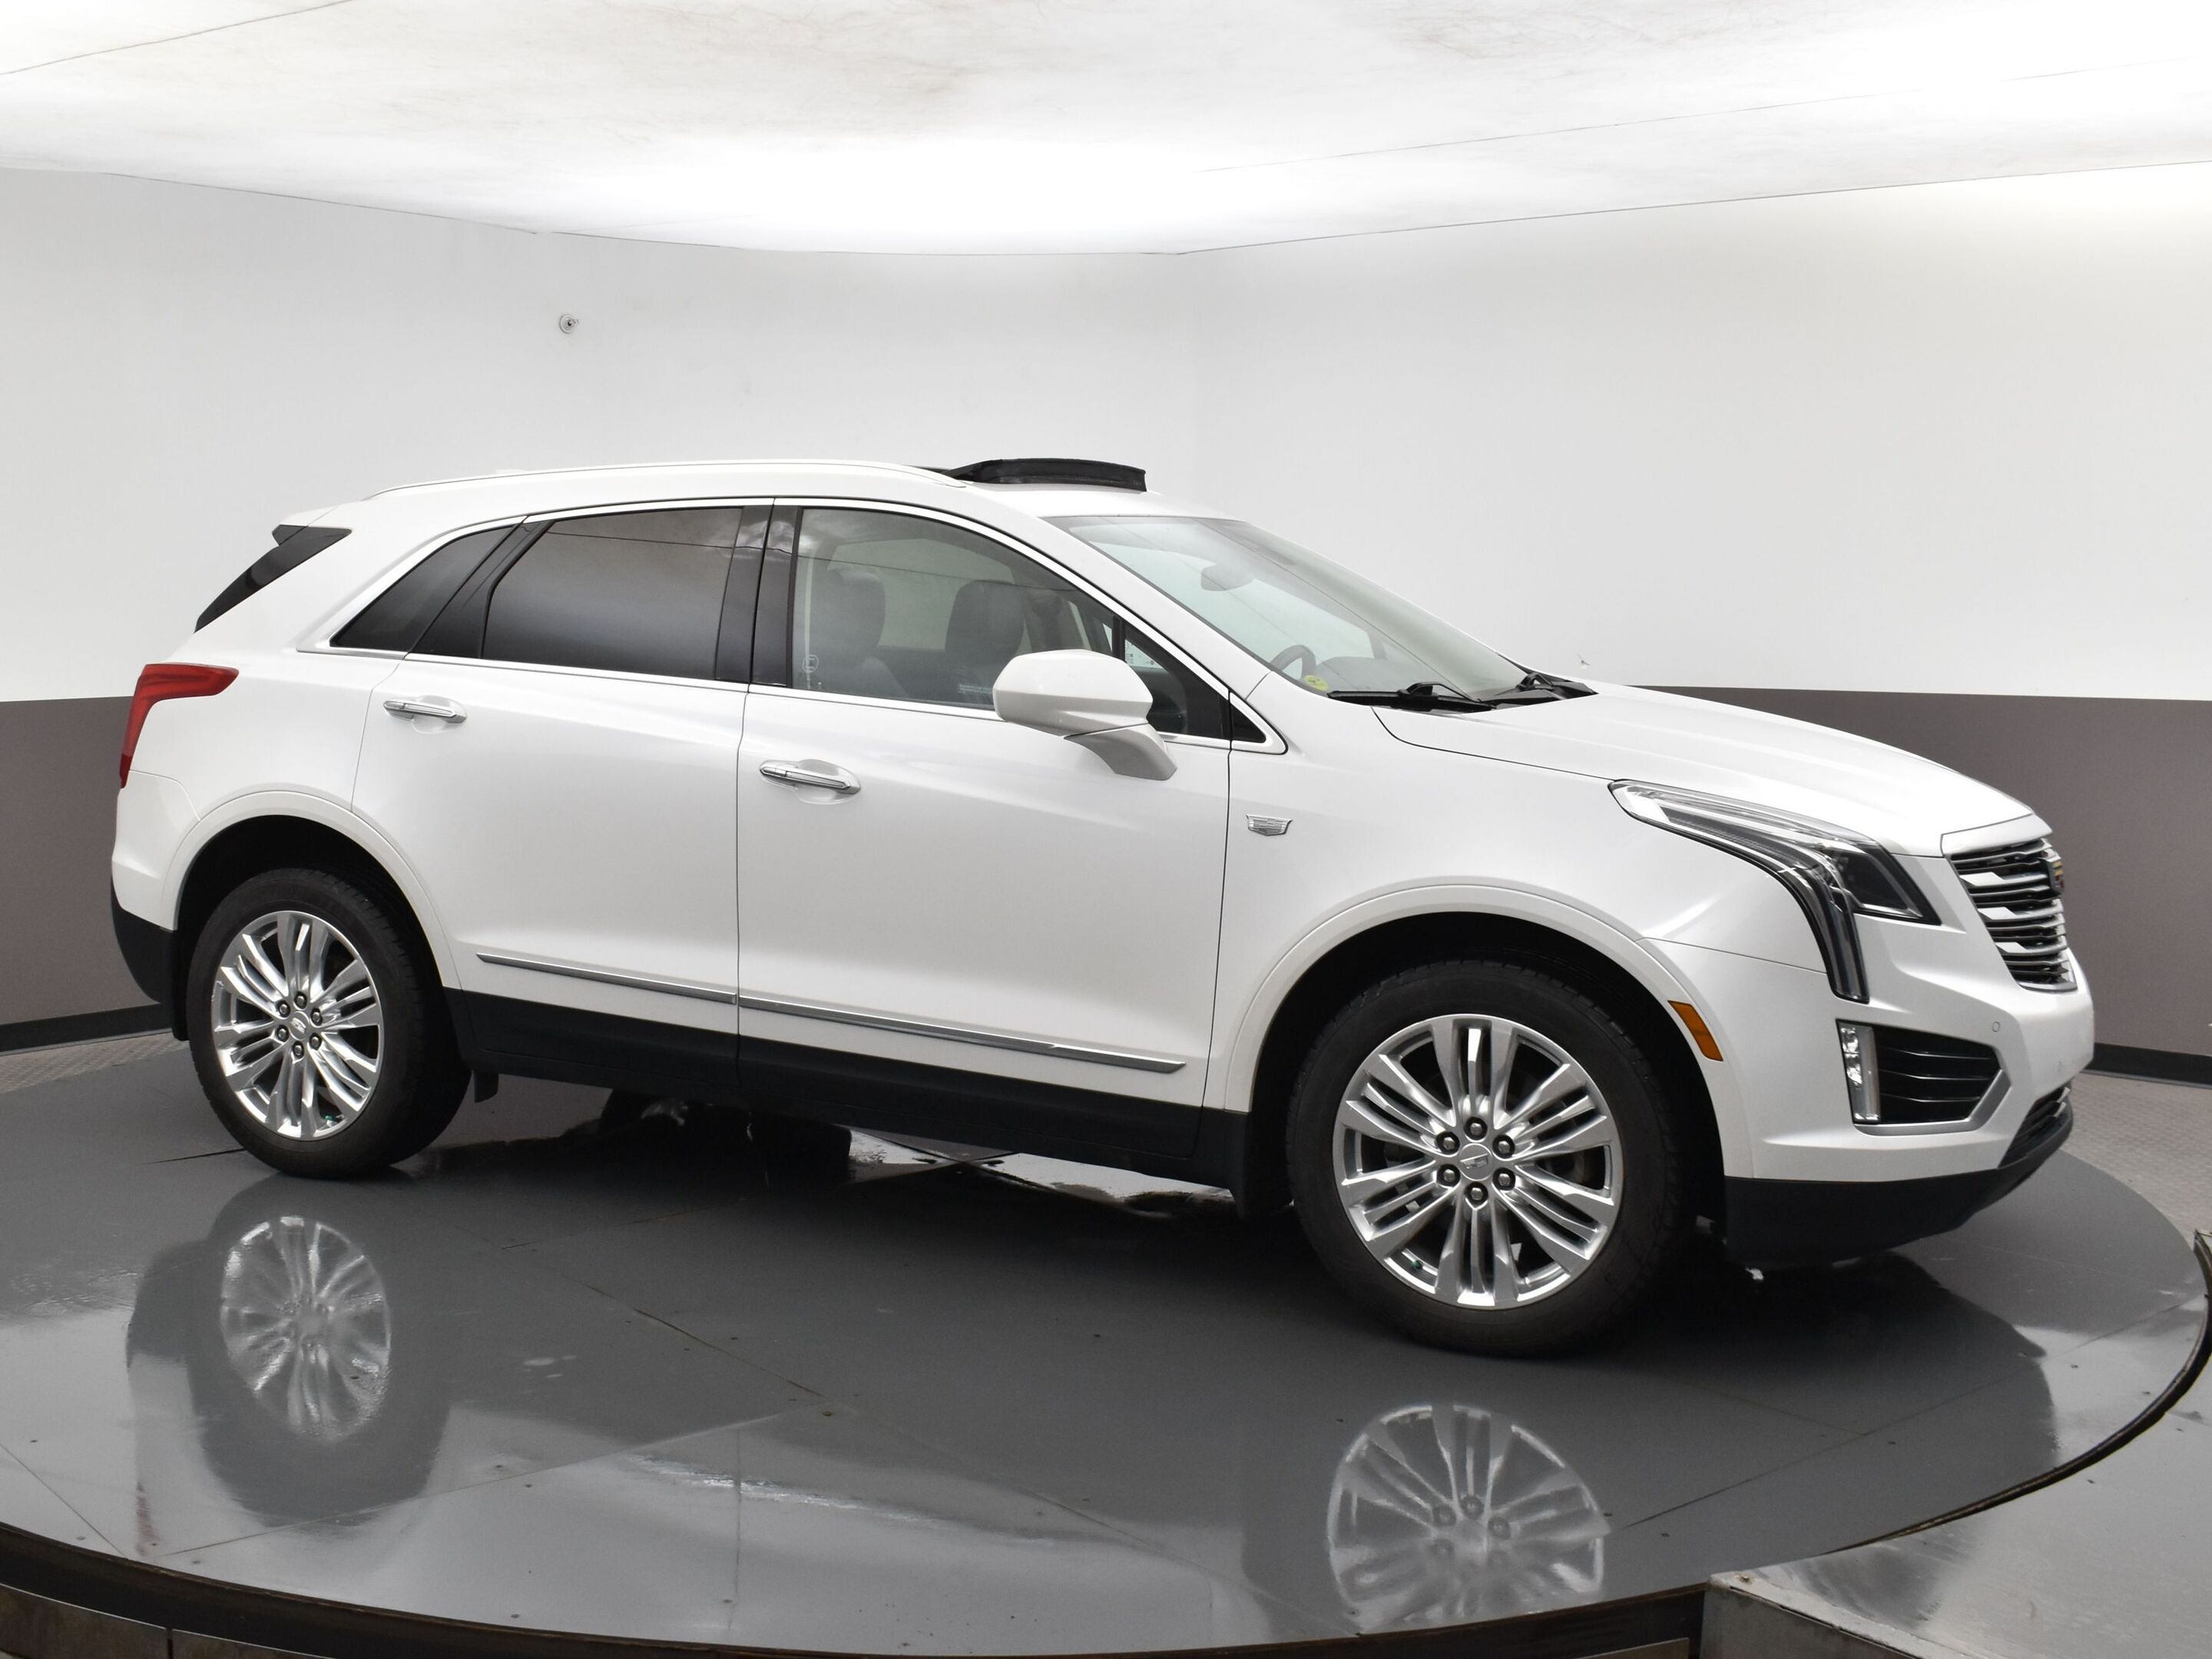 2017 Cadillac XT5 LUXURY AWD w/ Heated front seats, dual zone climat